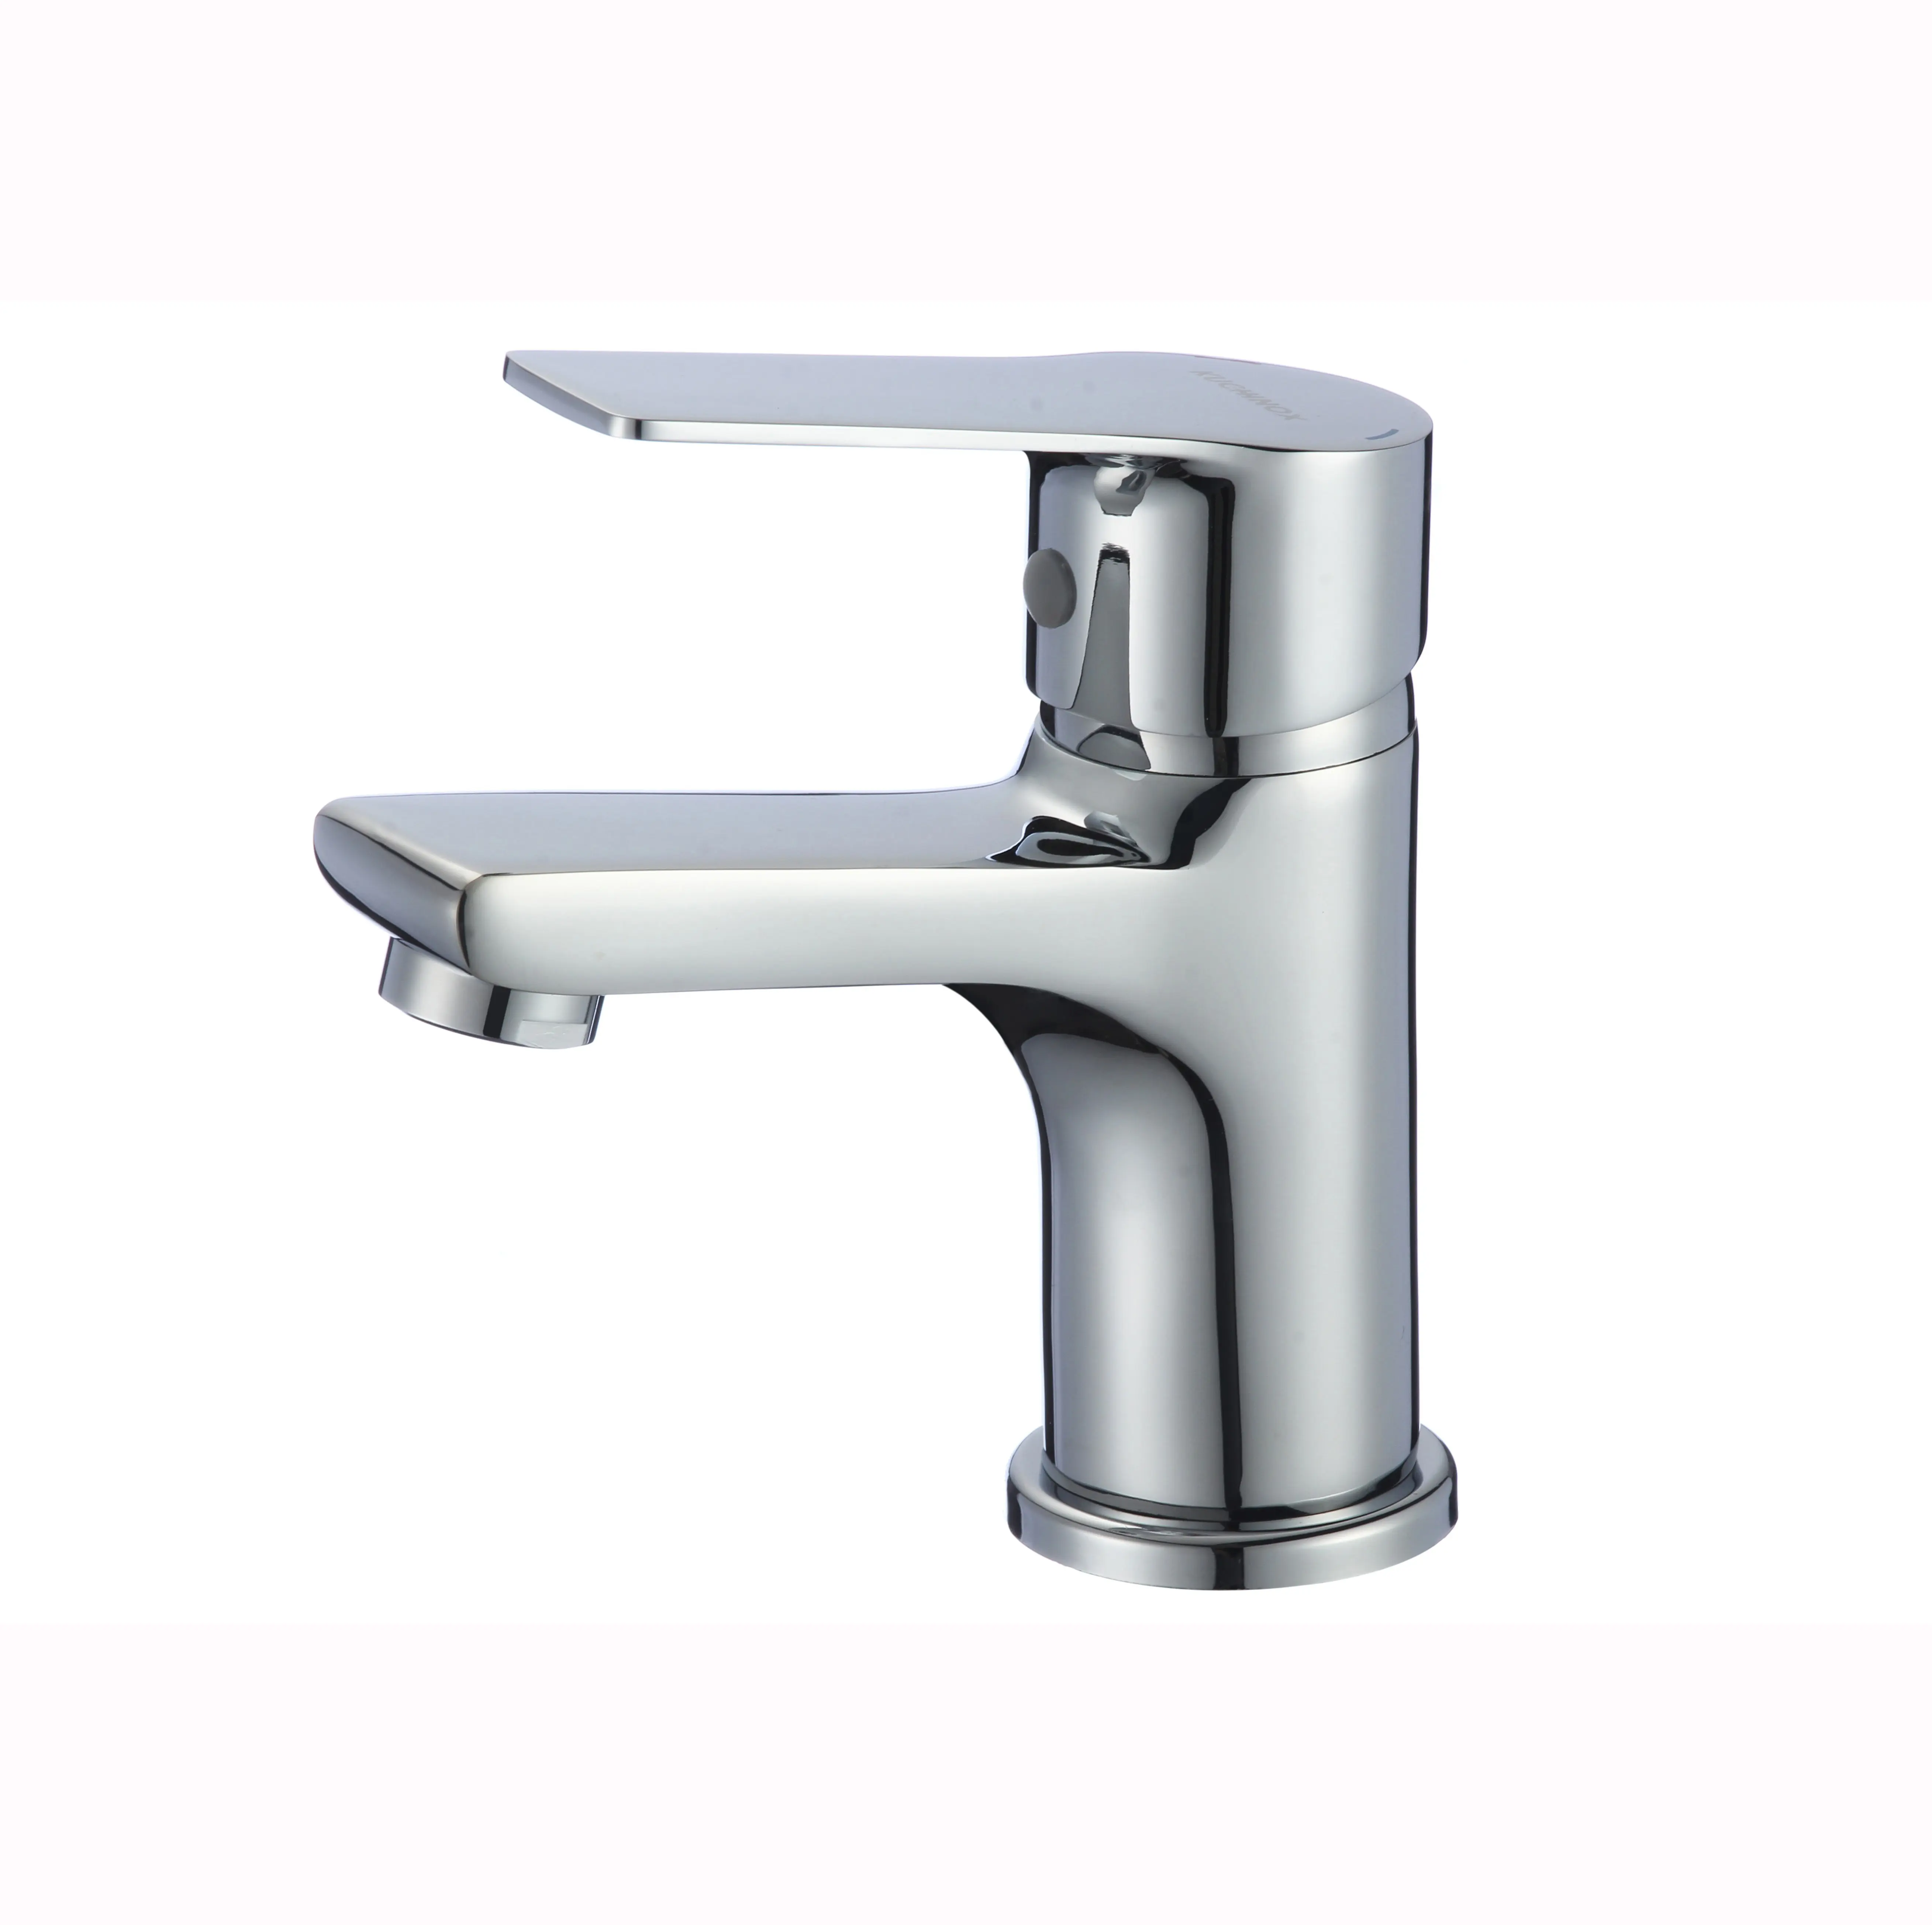 Hot and Cold Sink Mixer Brass Cartridge Modern Water Taps Sanitary Ware Building Material Bathroom Basin Faucet